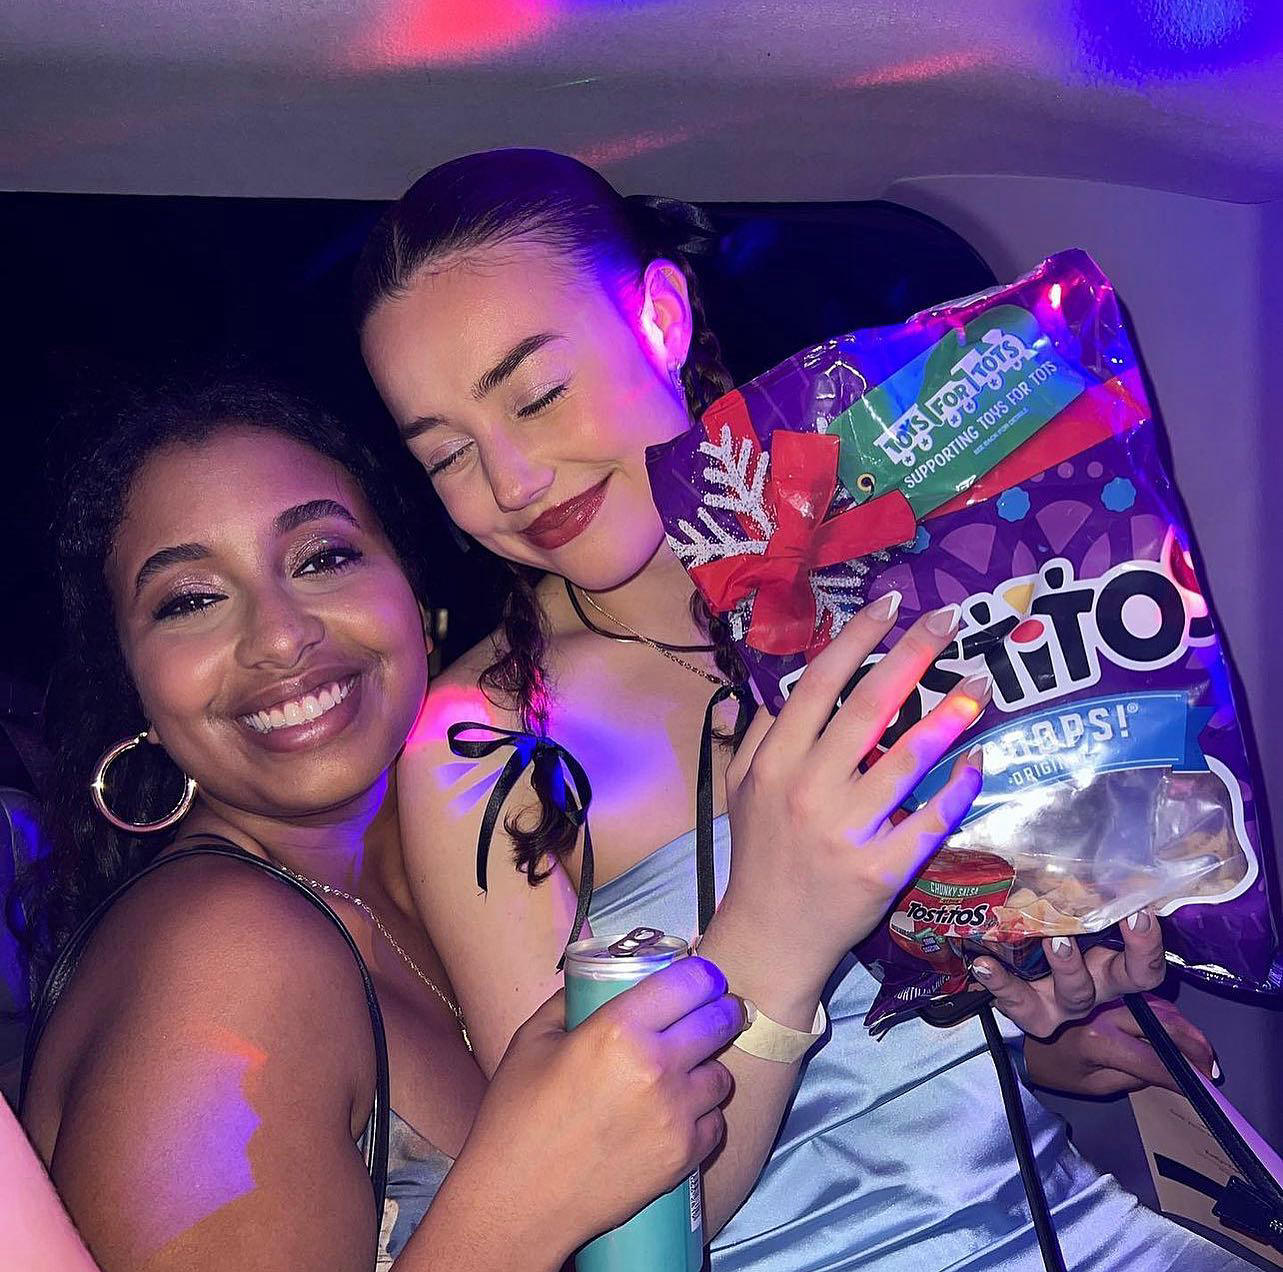 Tostitos - We love a good holiday sleigh